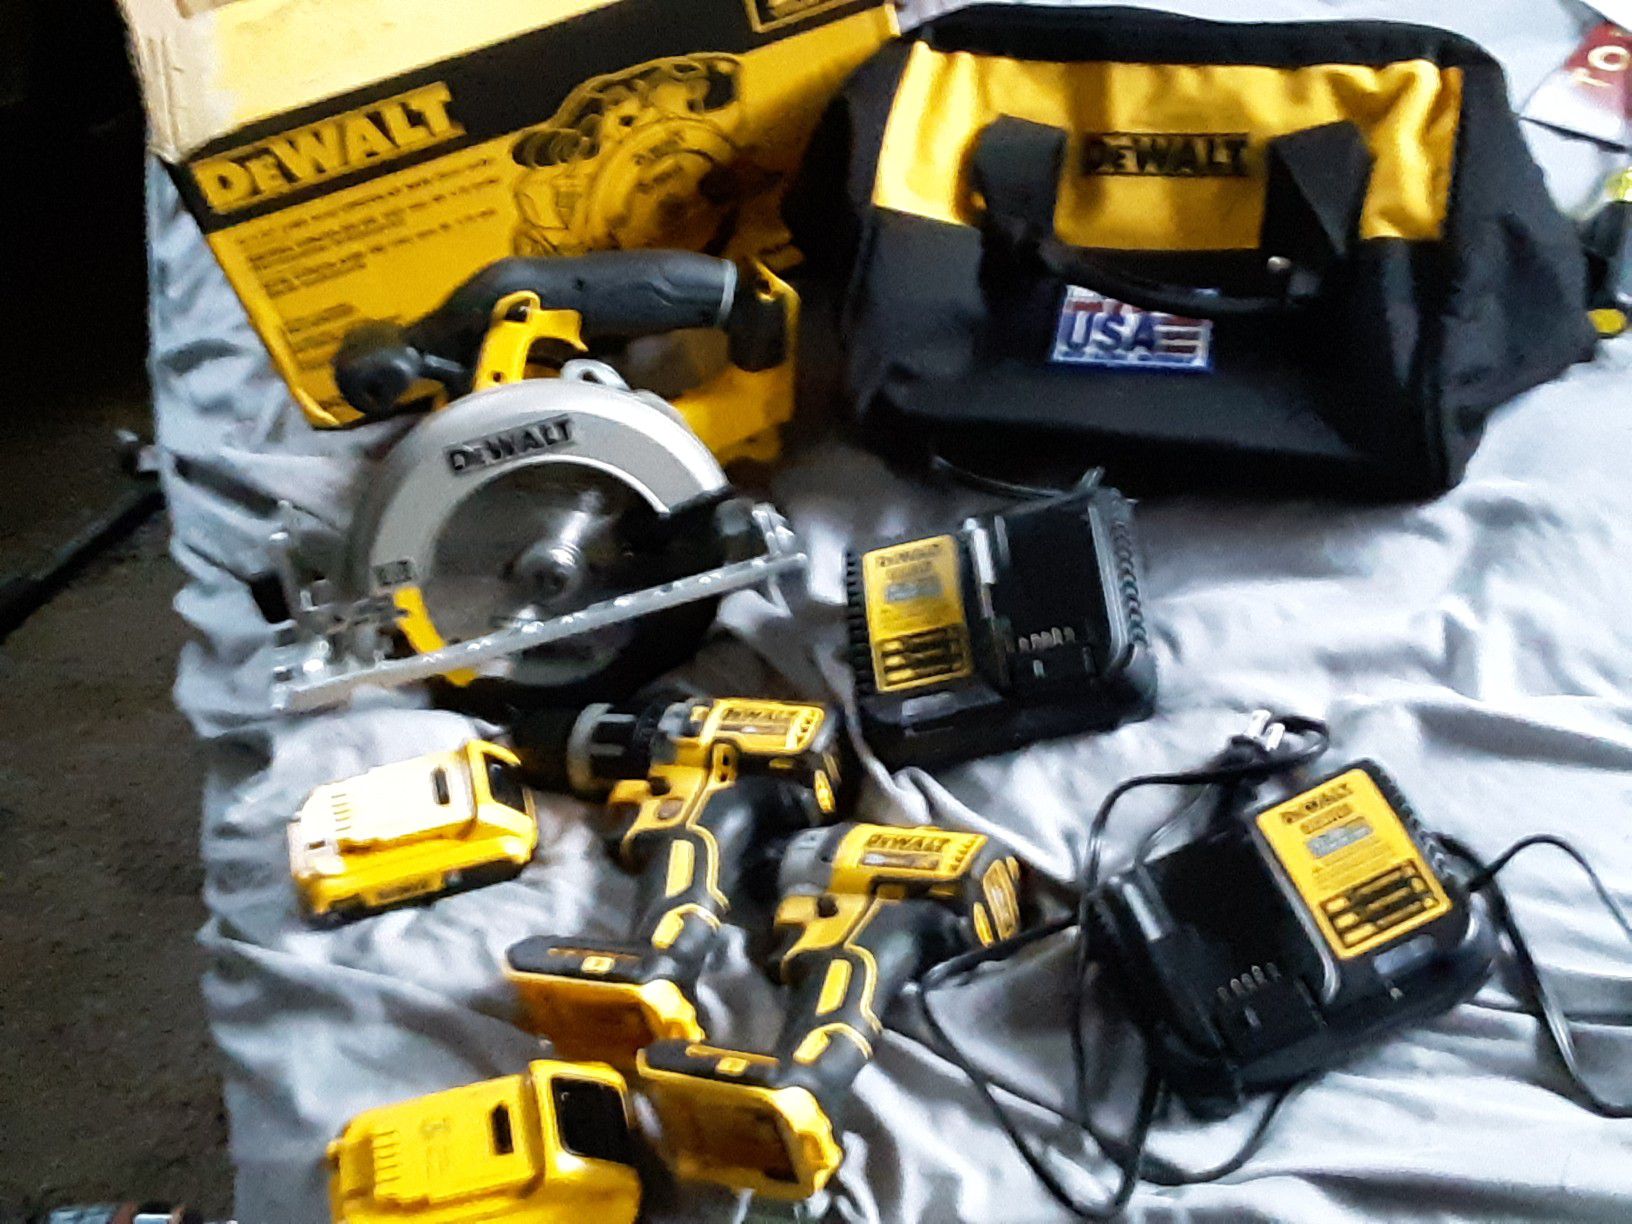 20v XR impact and hammer drill & 20v max circular saw. 2 batteries and 2 chargers.